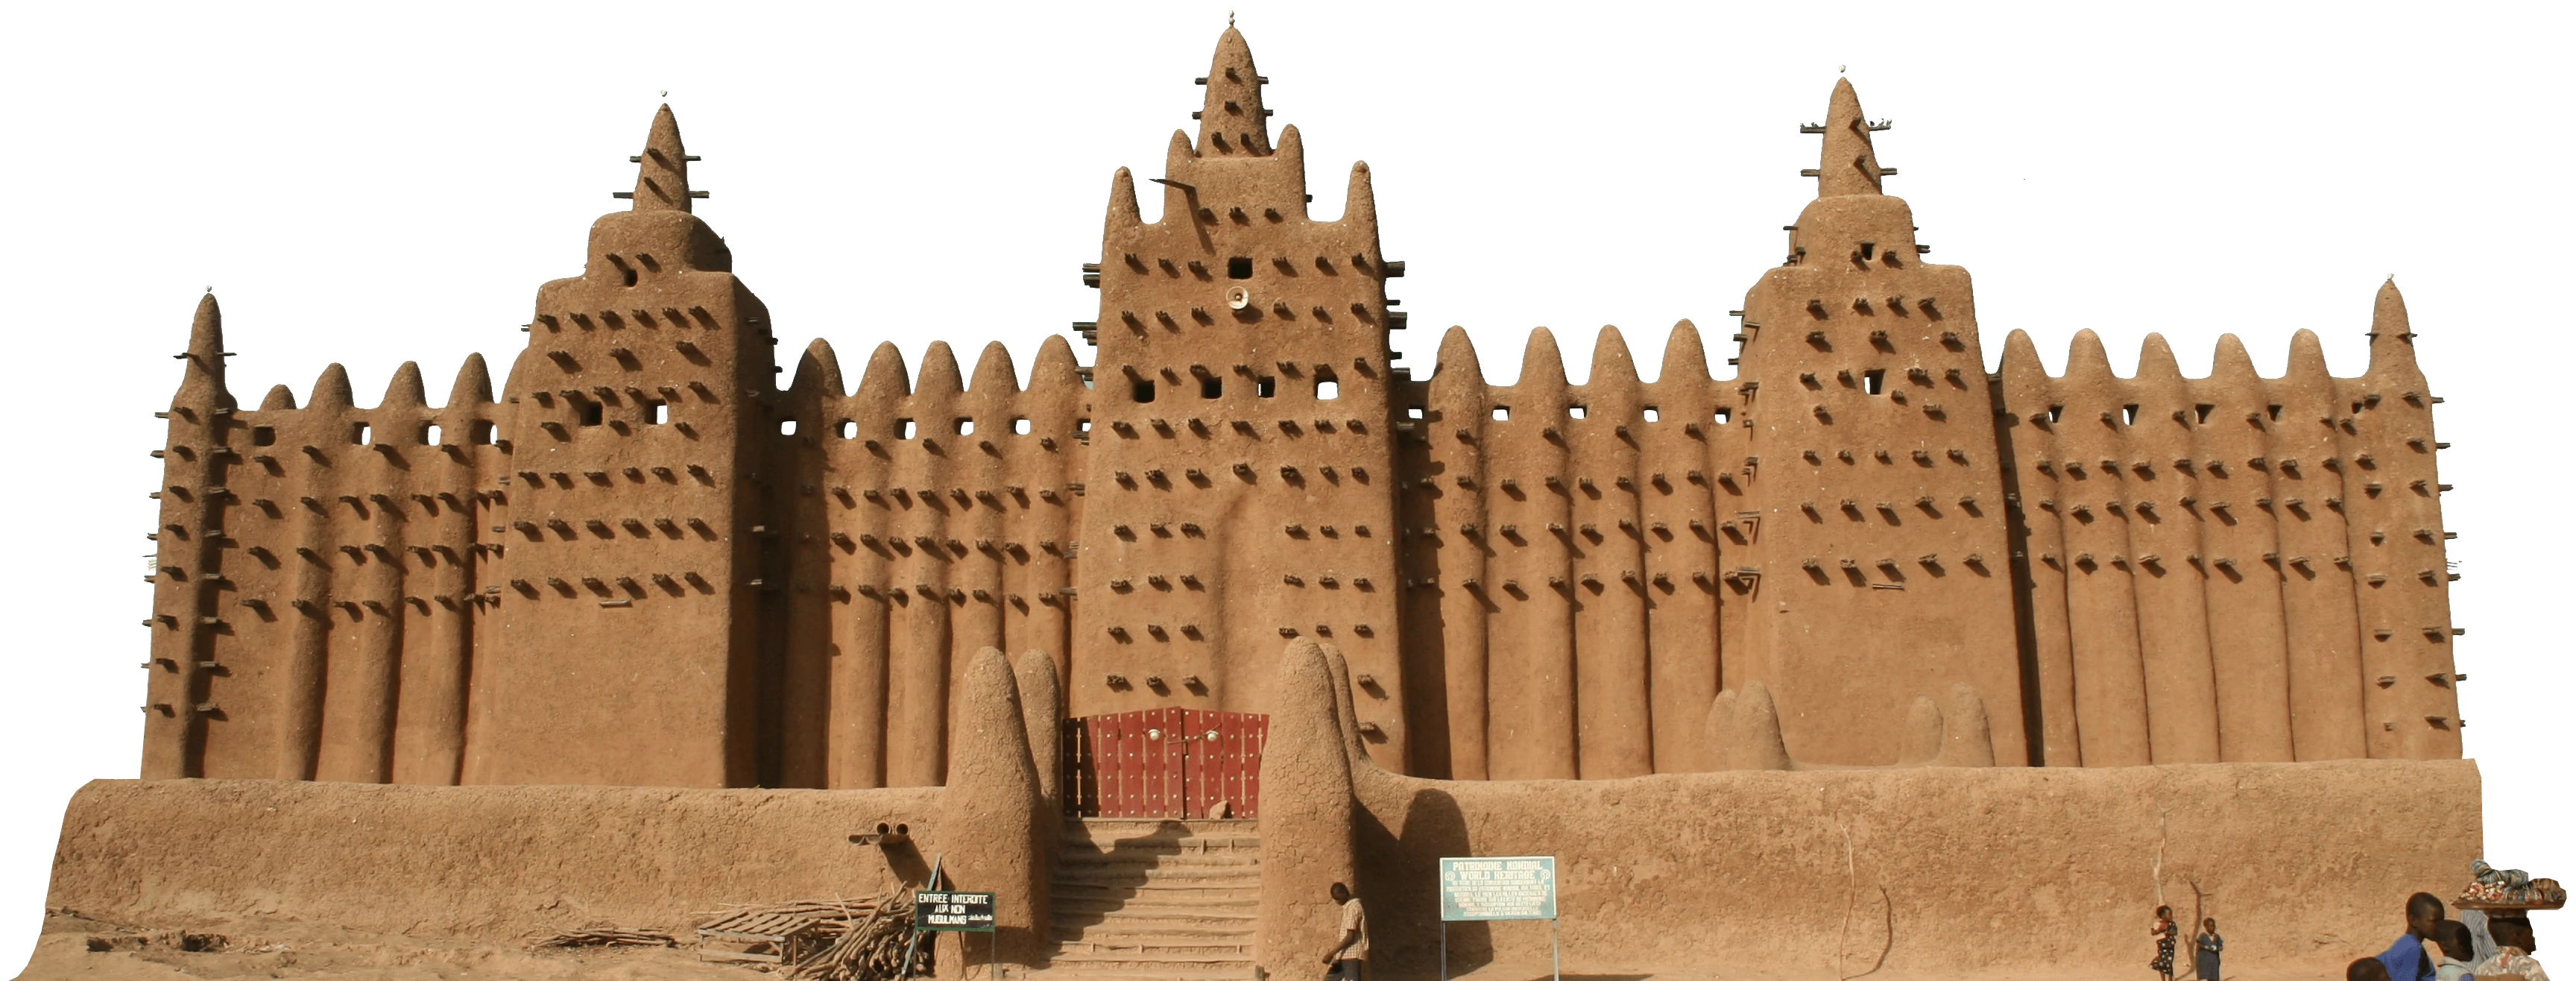 Great Mosque of Djenné, Mali